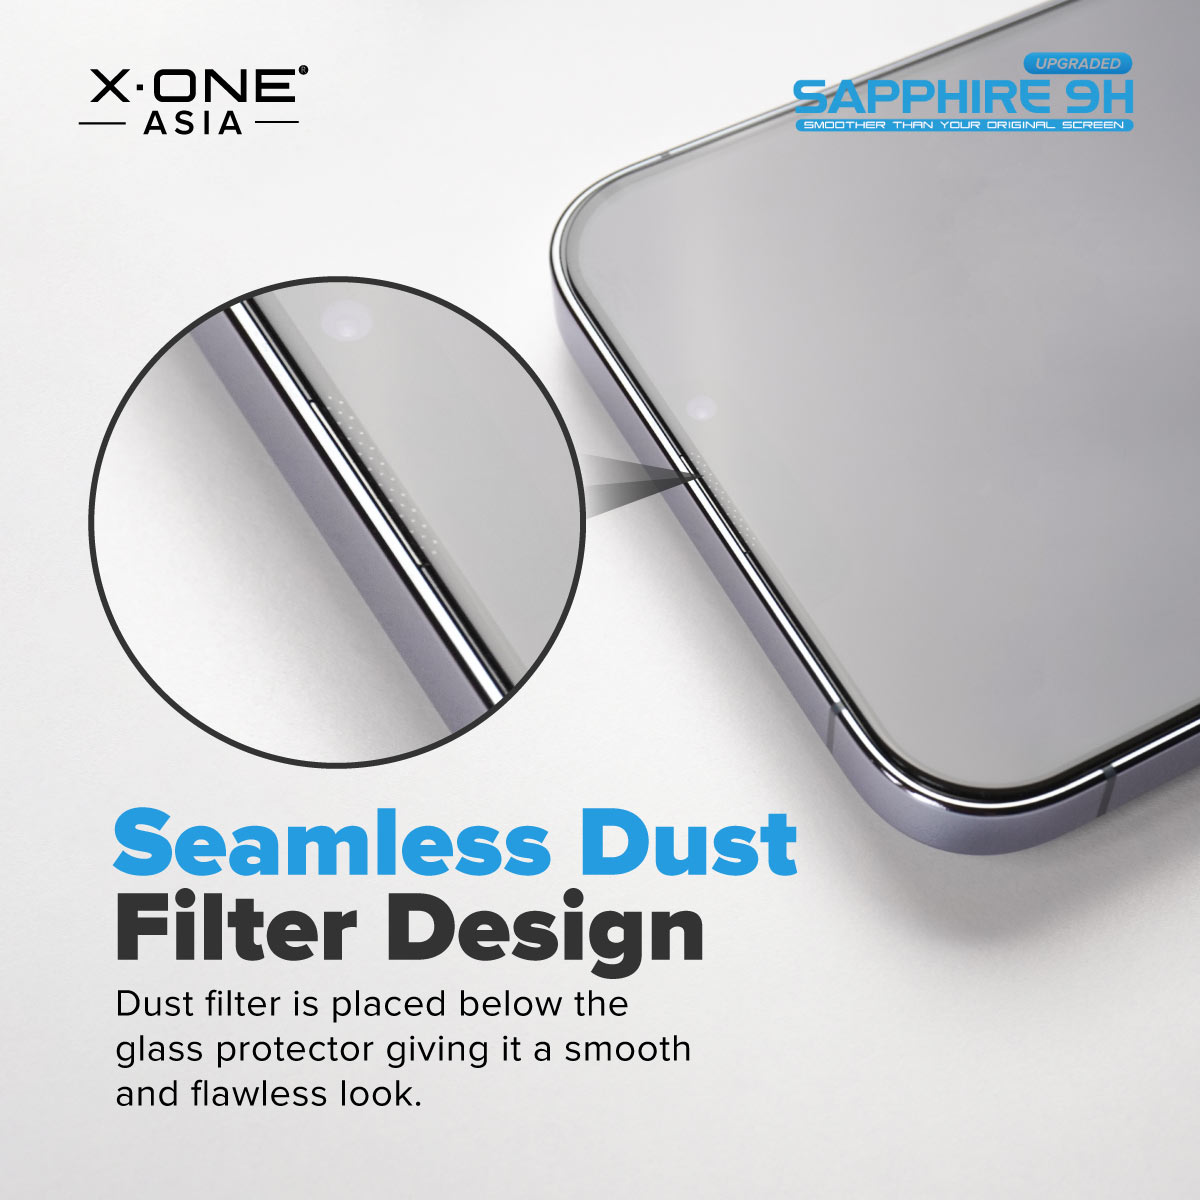 X.One® Upgraded Sapphire Coated Glass with Dust Free Installer Kit for iPhone